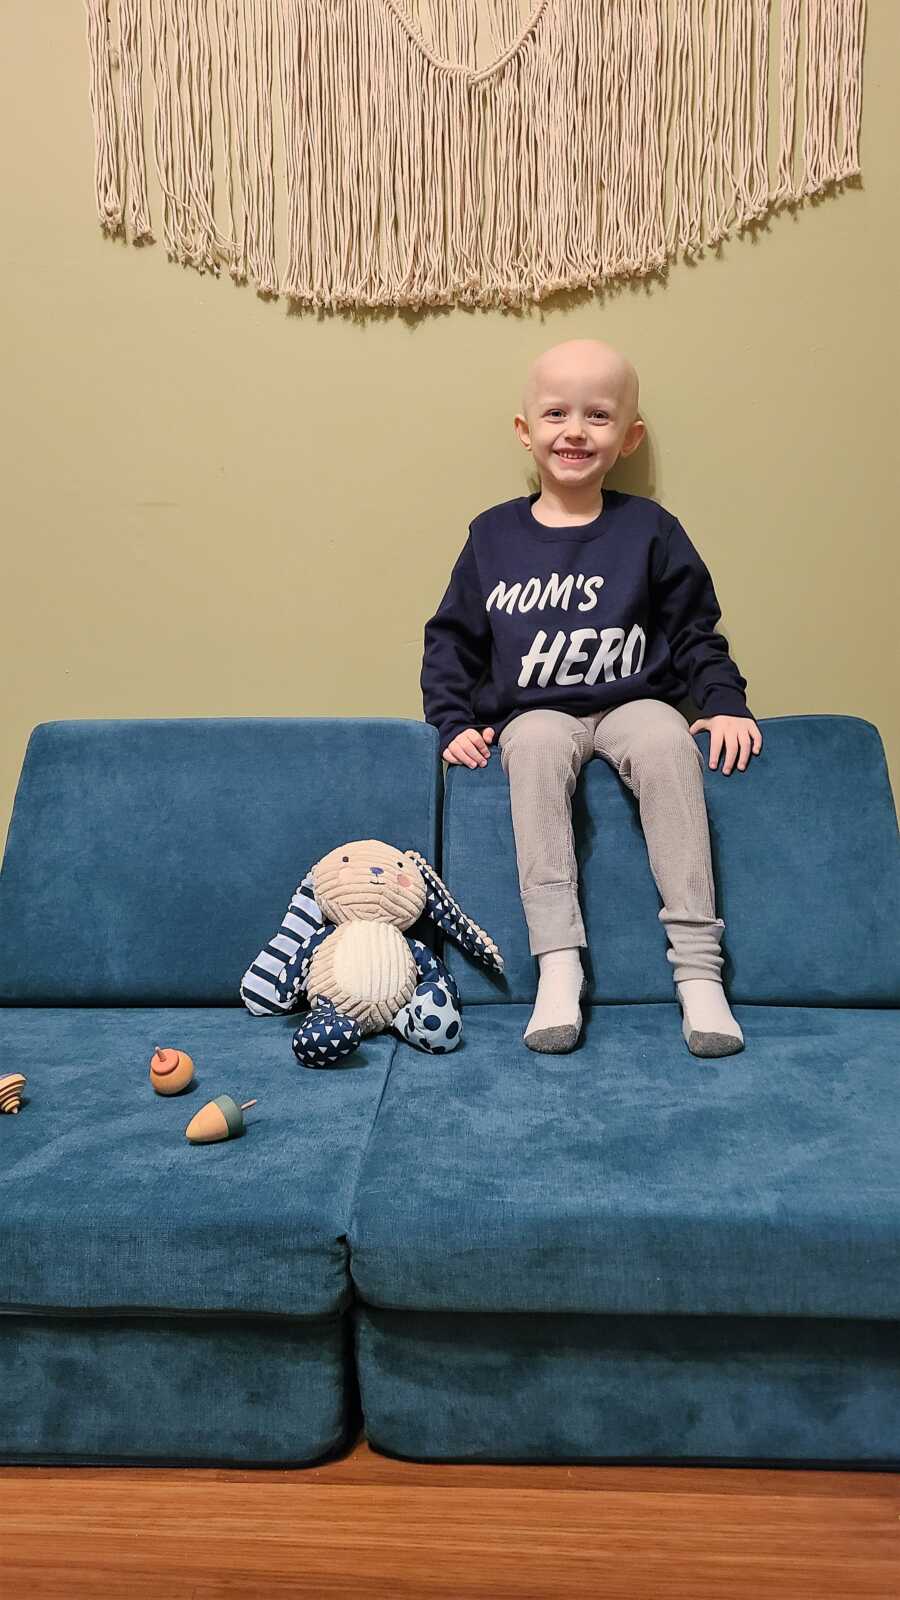 5-year-old cancer survivor sitting on a blue couch with a shirt that says 'Mom's Hero'